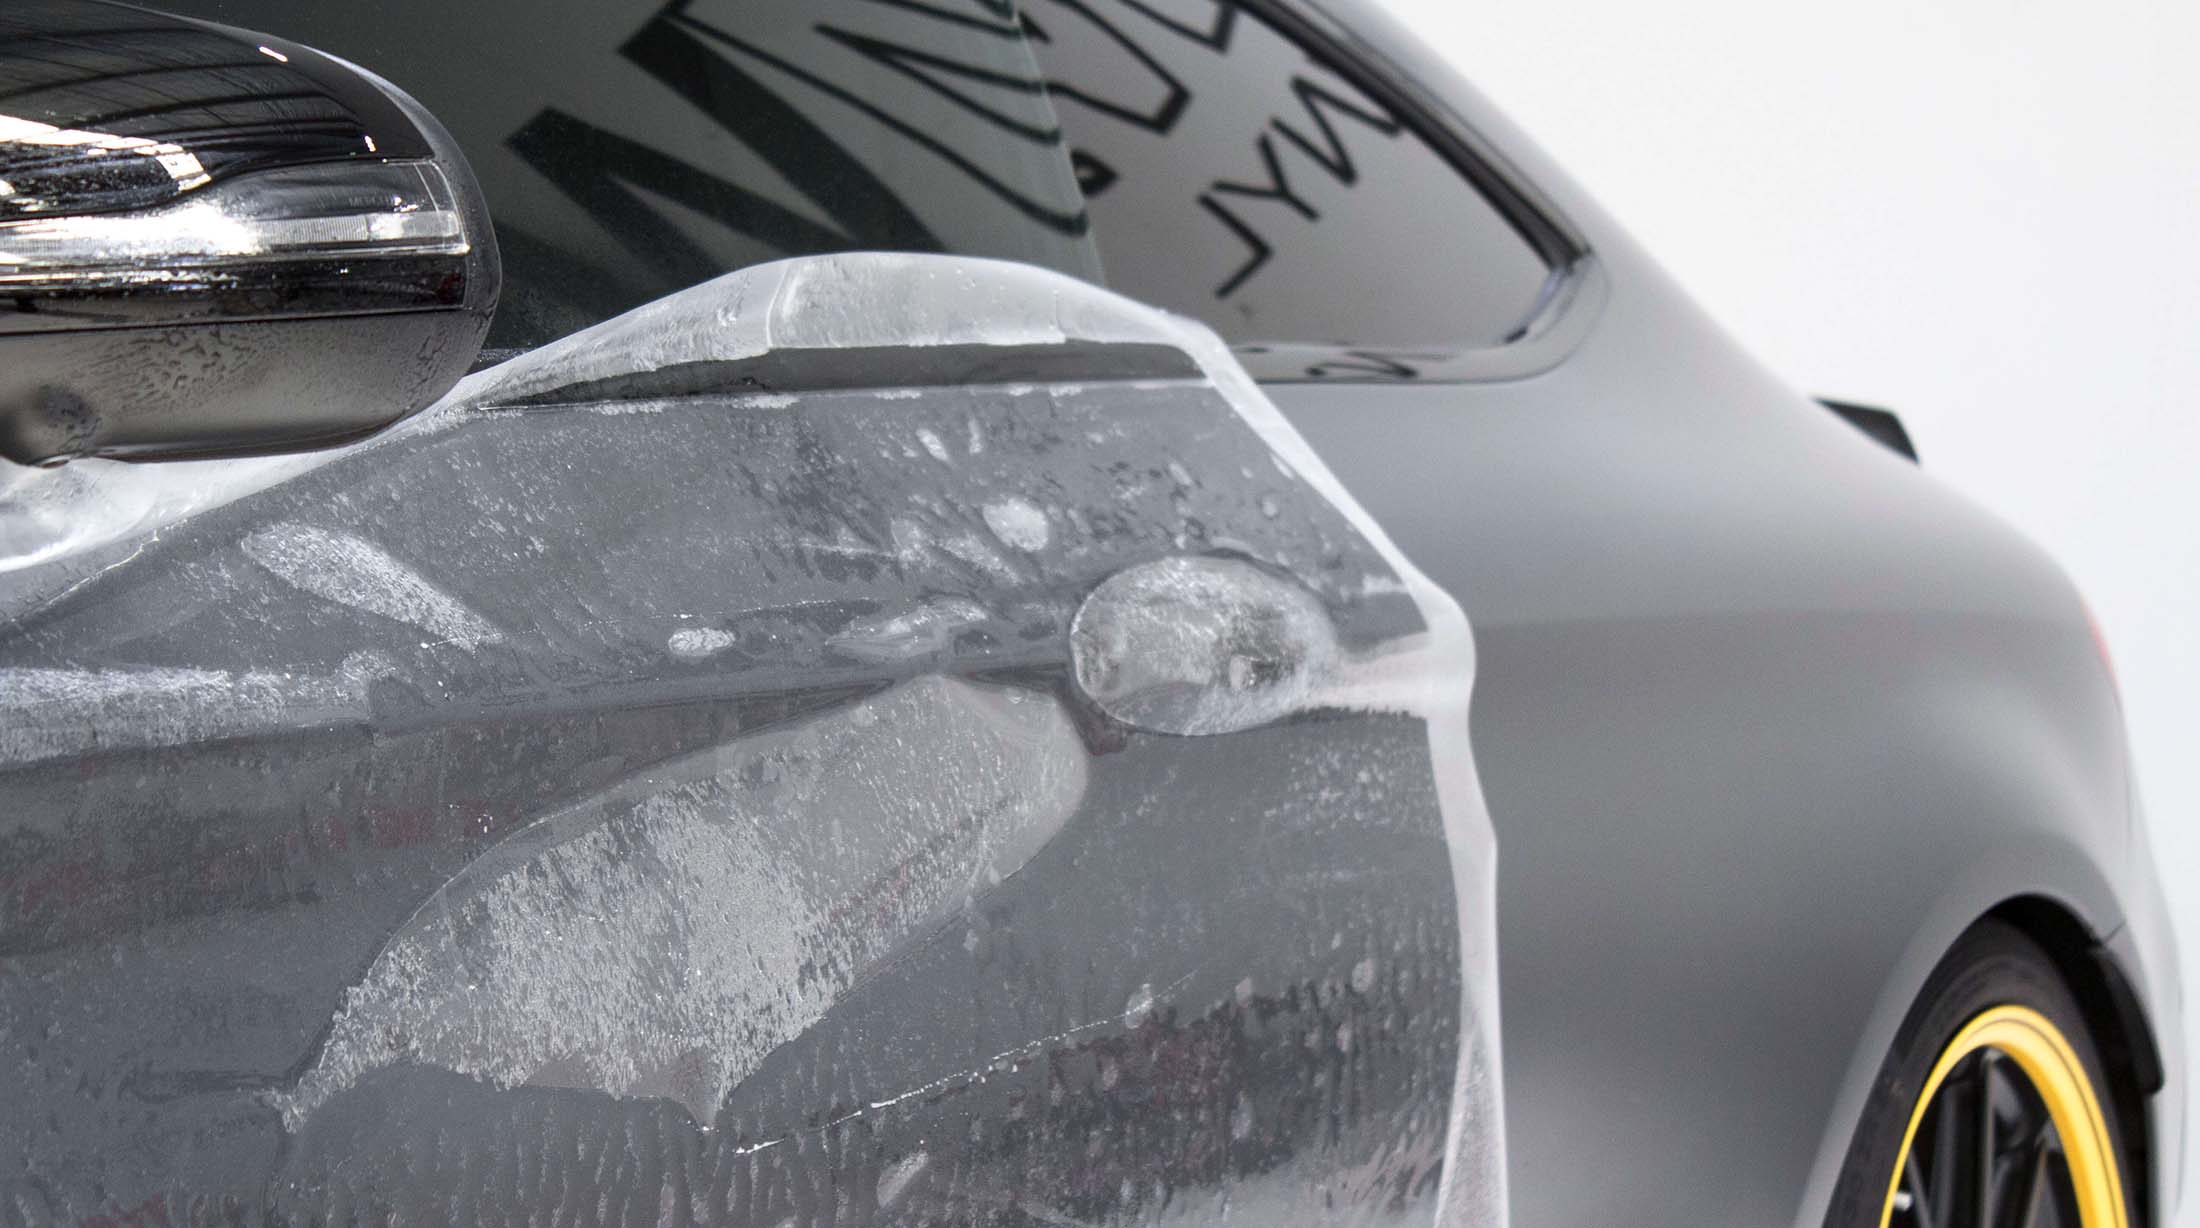 How Does Paint Protection Film Work?